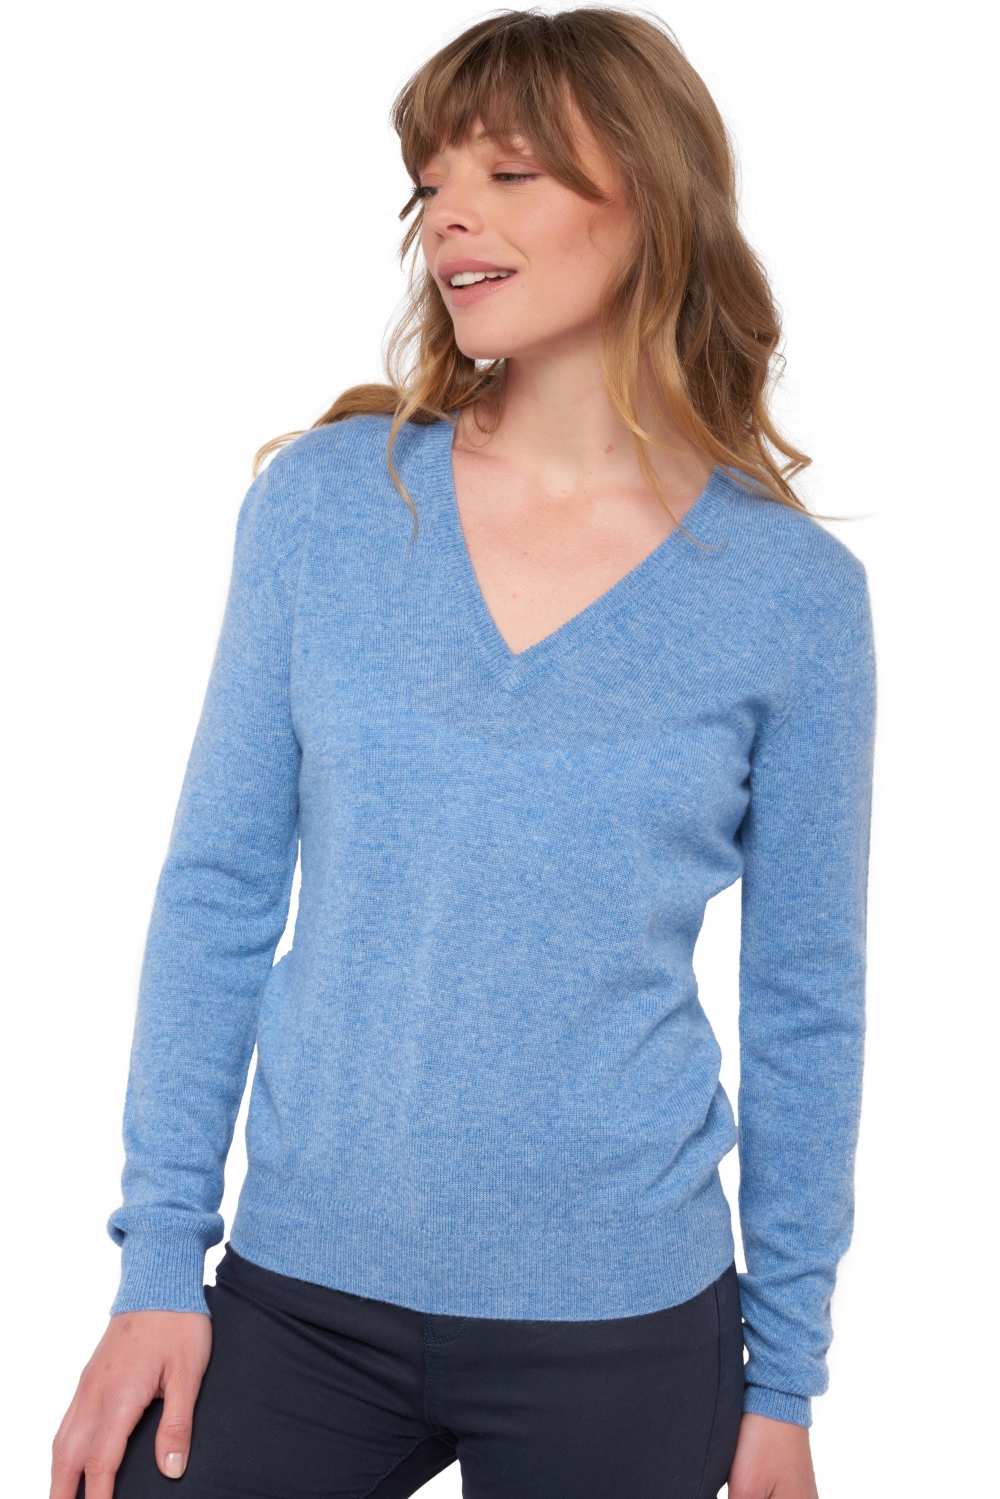 Cachemire pull femme faustine mirage 3xl